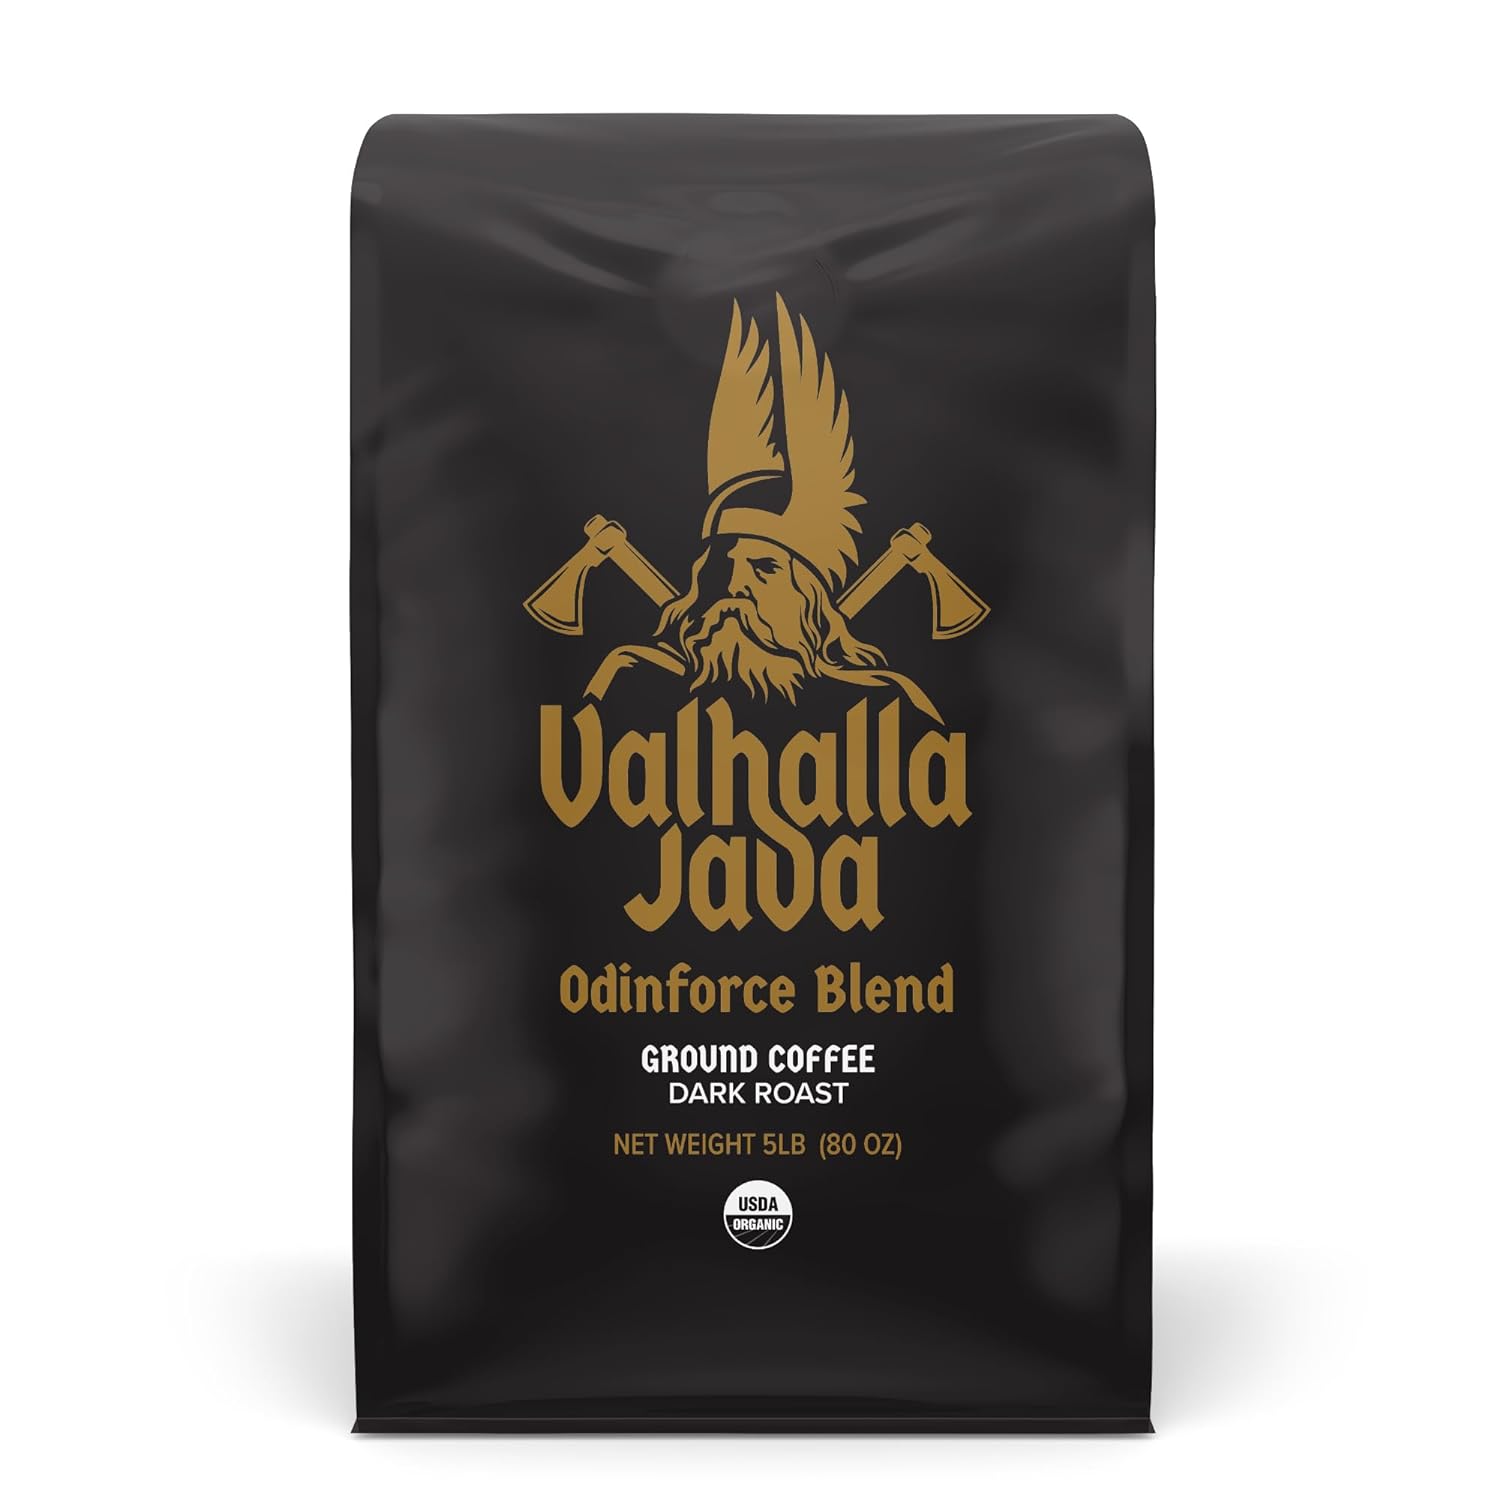 Death Wish Coffee Co. Valhalla Java Dark Roast Grounds - Extra Kick of Caffeine - 5 Lb. - Bold & Intense Blend of Arabica Robusta Beans - USDA Organic Ground Coffee - Strong Coffee for Morning Boost